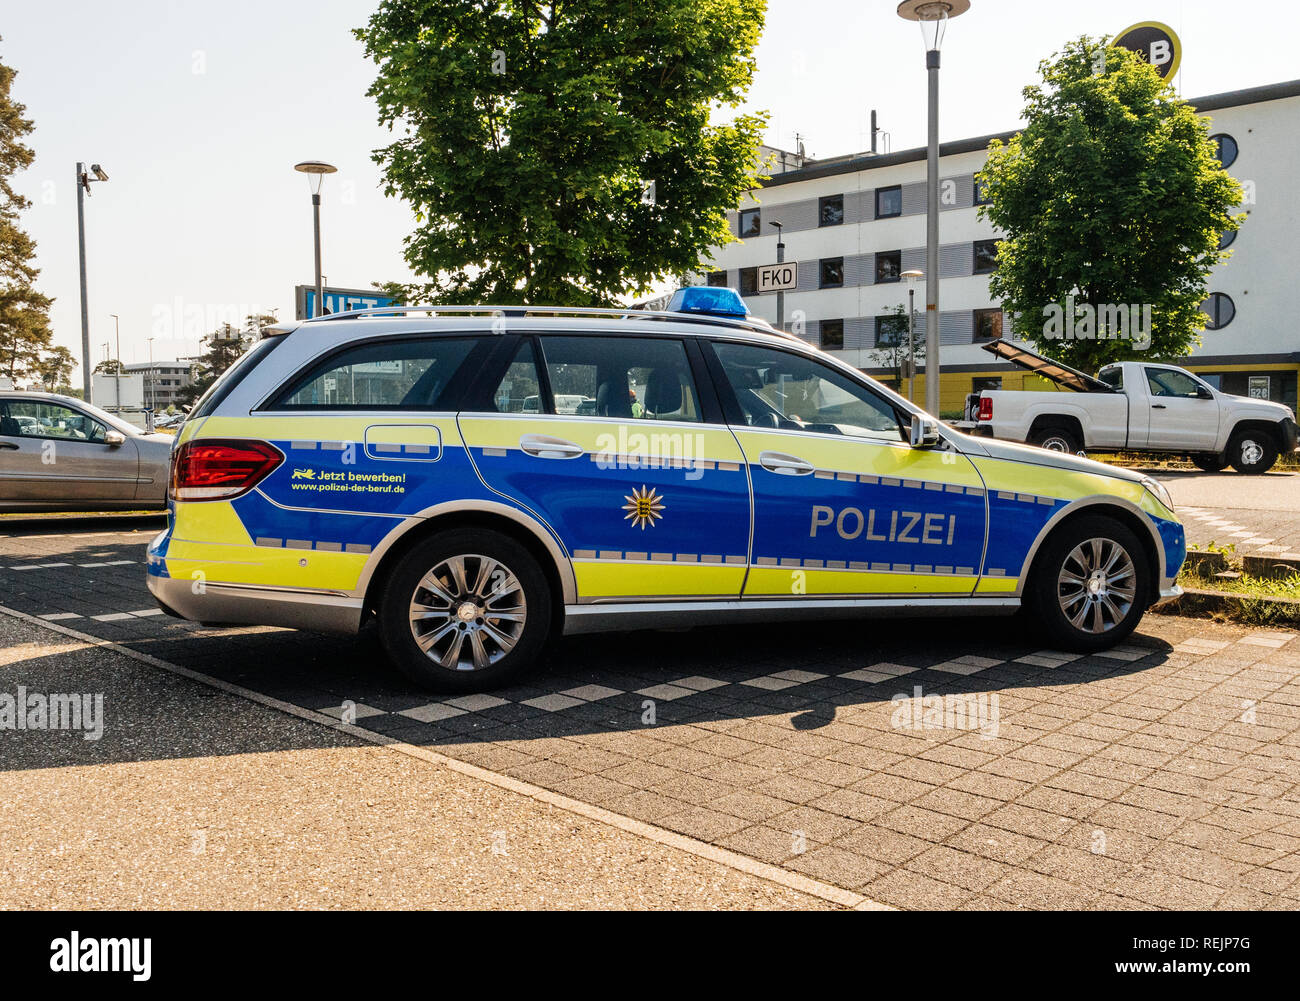 BADEN, GERMANY - MAY 11, 2018: Polizei Police car Mercedes-Benz blue car parked in front of Karlsruhe Baden-Baden Airport (IATA: FKB, ICAO: EDSB) Stock Photo